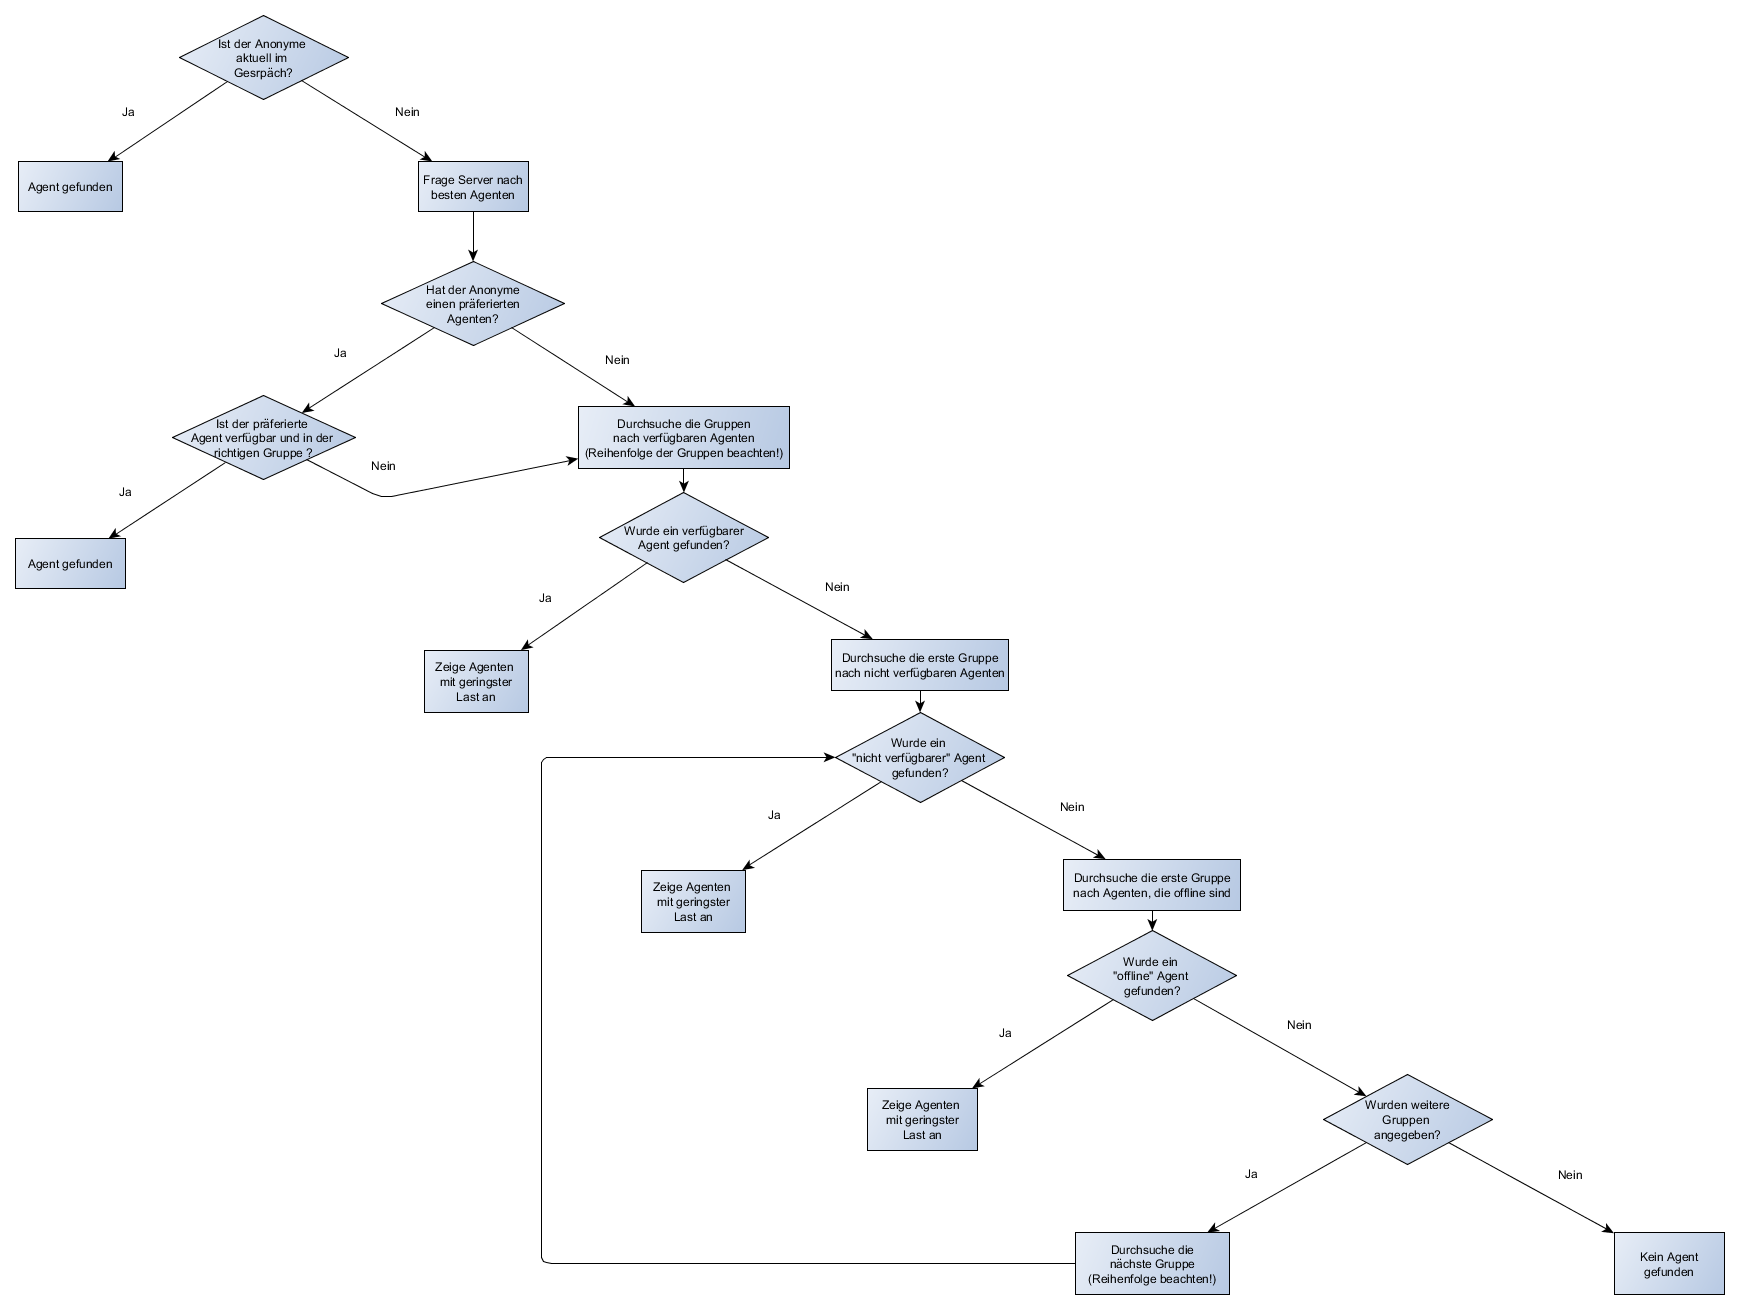 ../_images/ranking-decision-tree.png